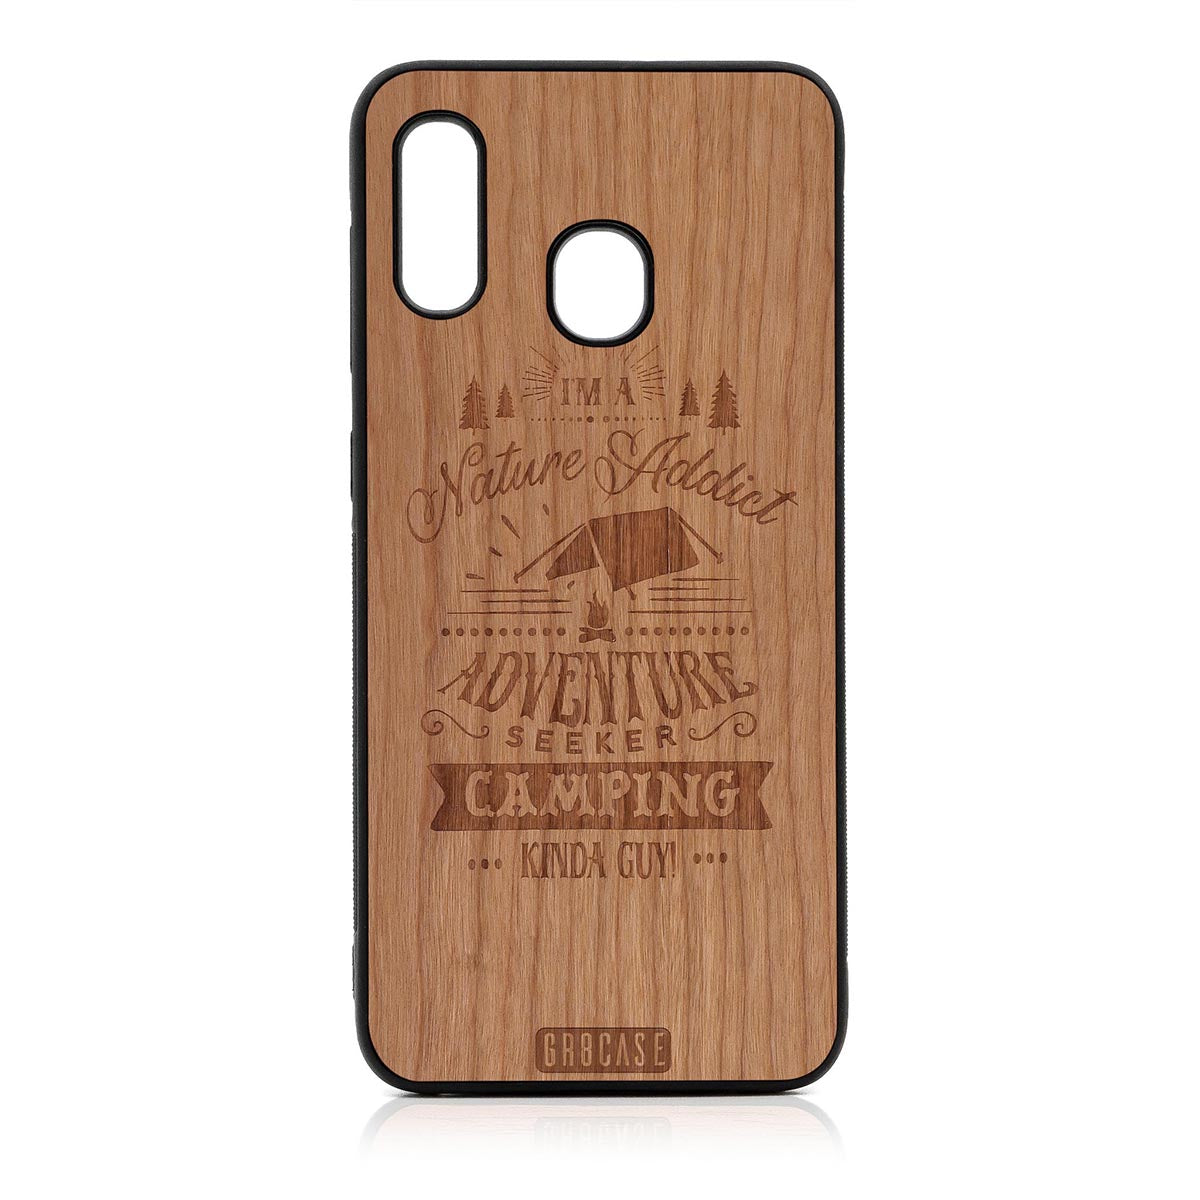 I'm A Nature Addict Adventure Seeker Camping Kinda Guy Design Wood Case For Samsung Galaxy A20 by GR8CASE